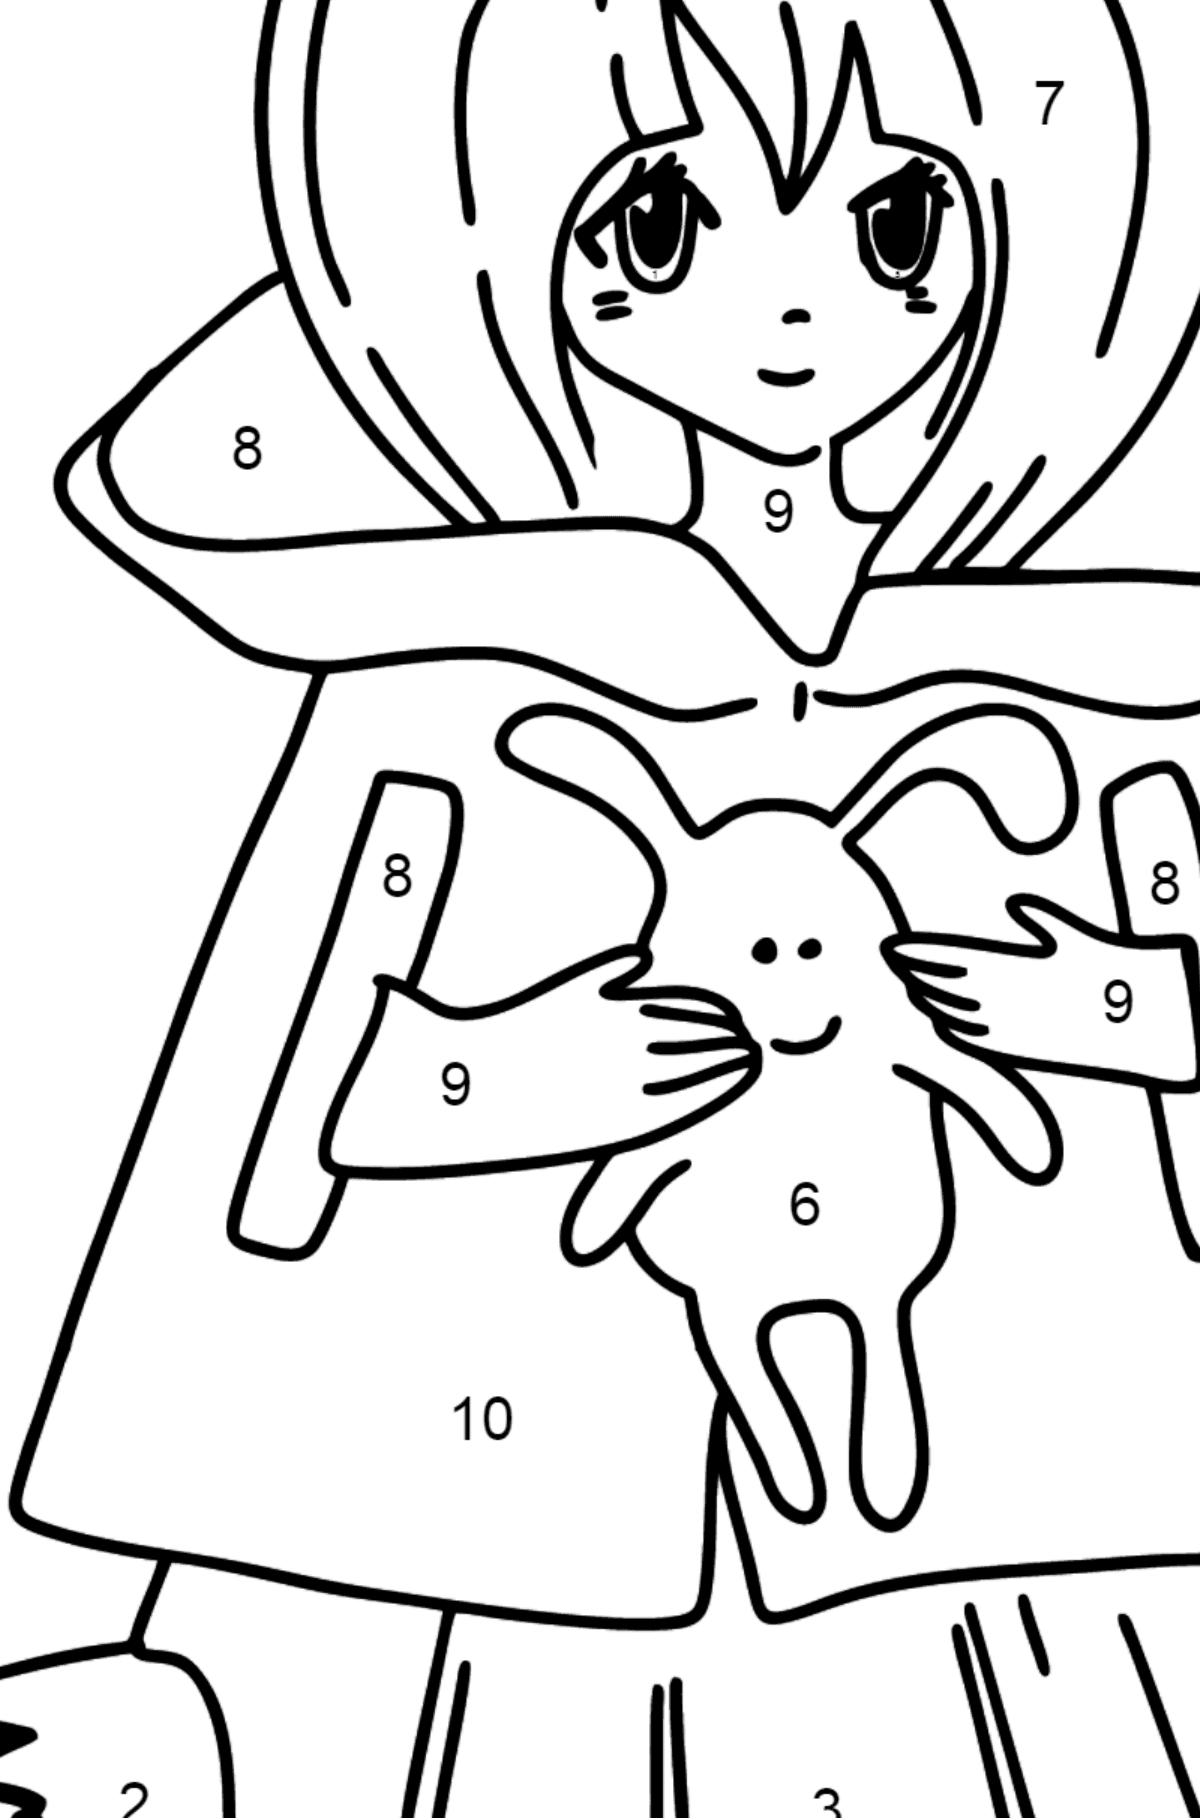 Anime Girl with Tail coloring page - Coloring by Numbers for Kids